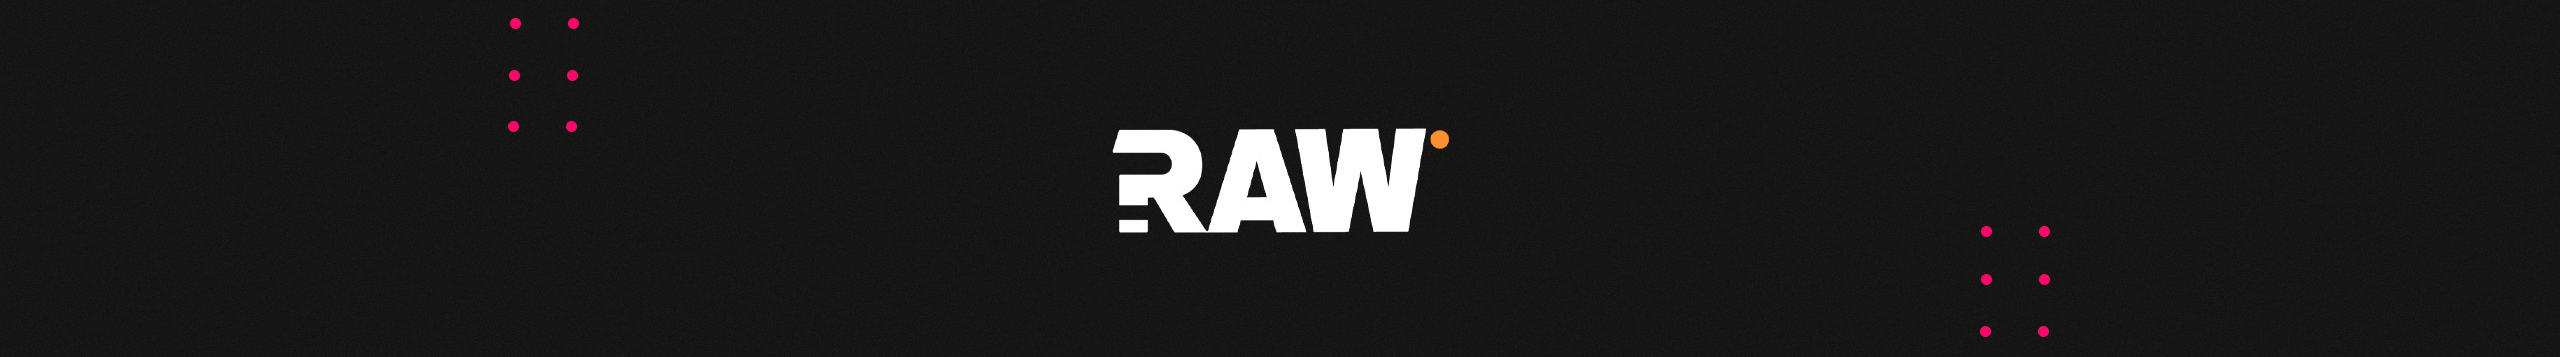 Raw Psd's profile banner